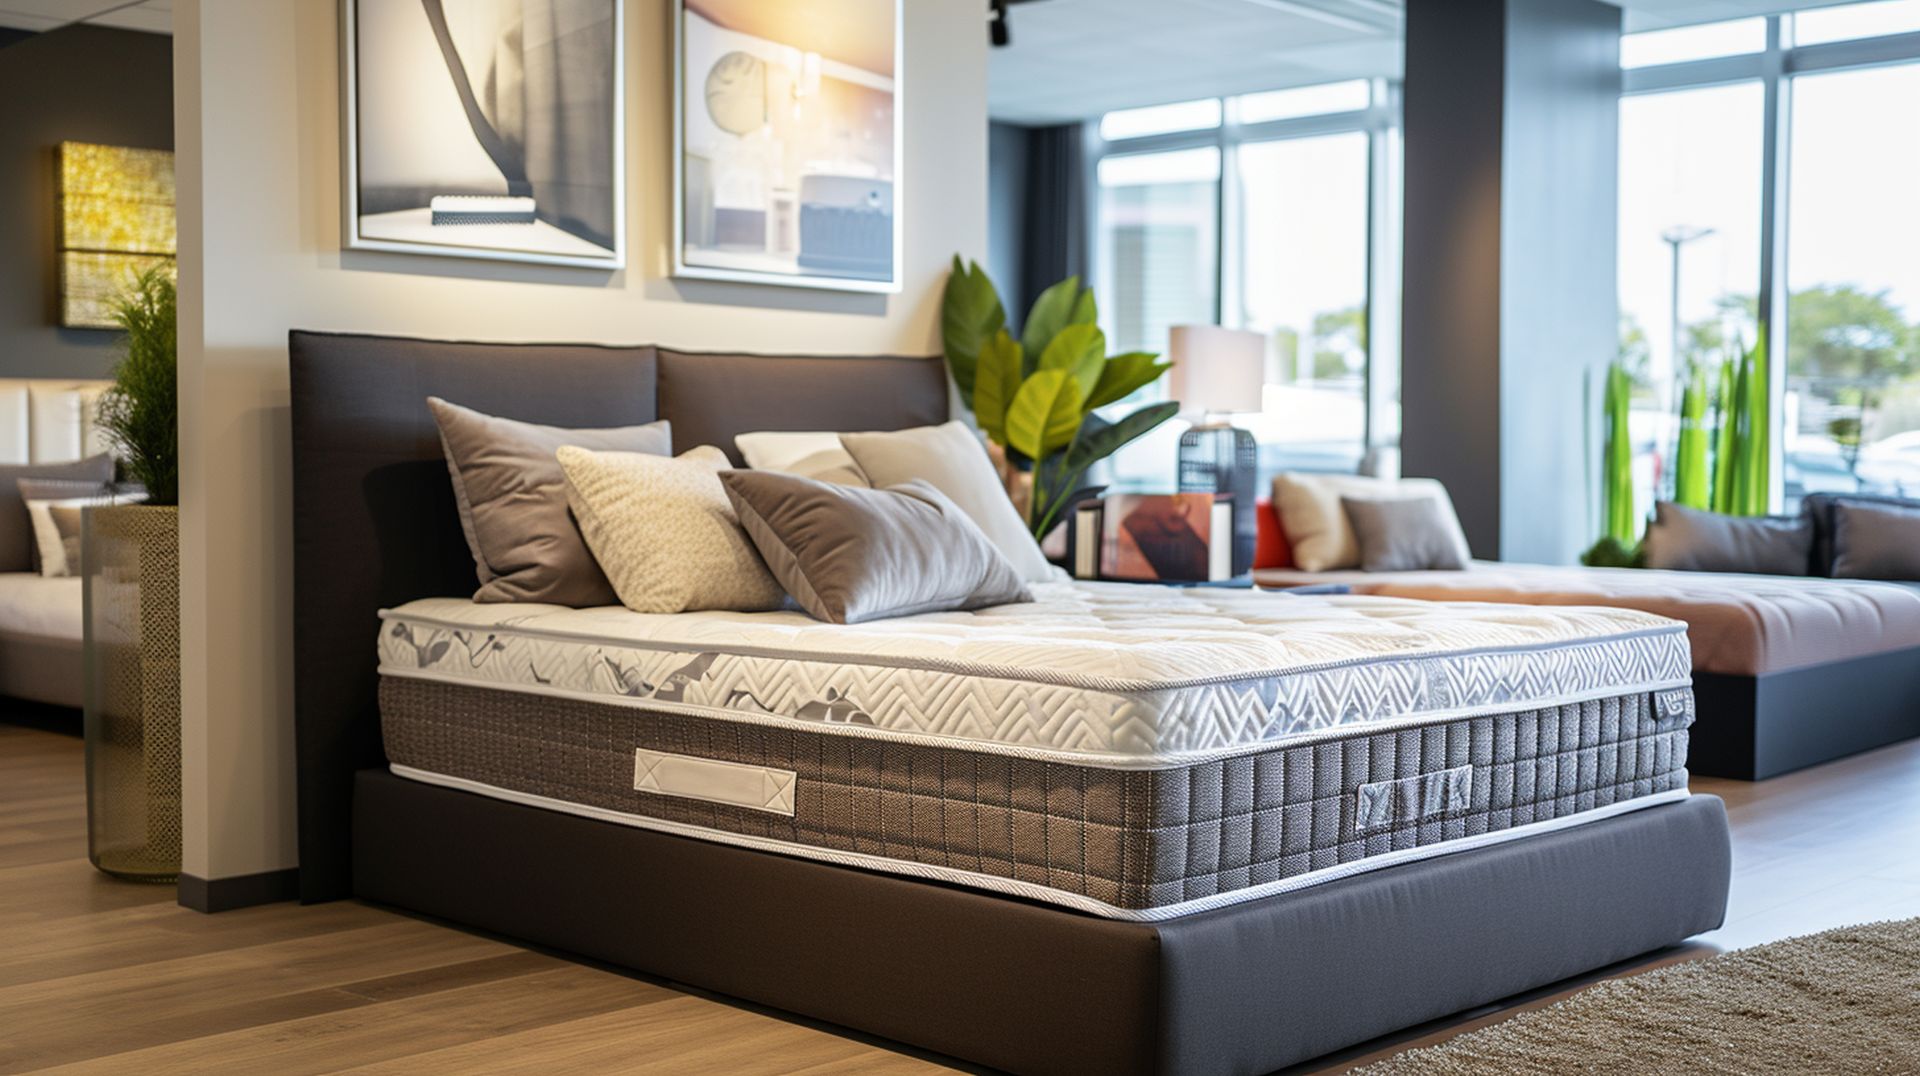 Types of mattresses at mattress dealers in Hawthorne, CA